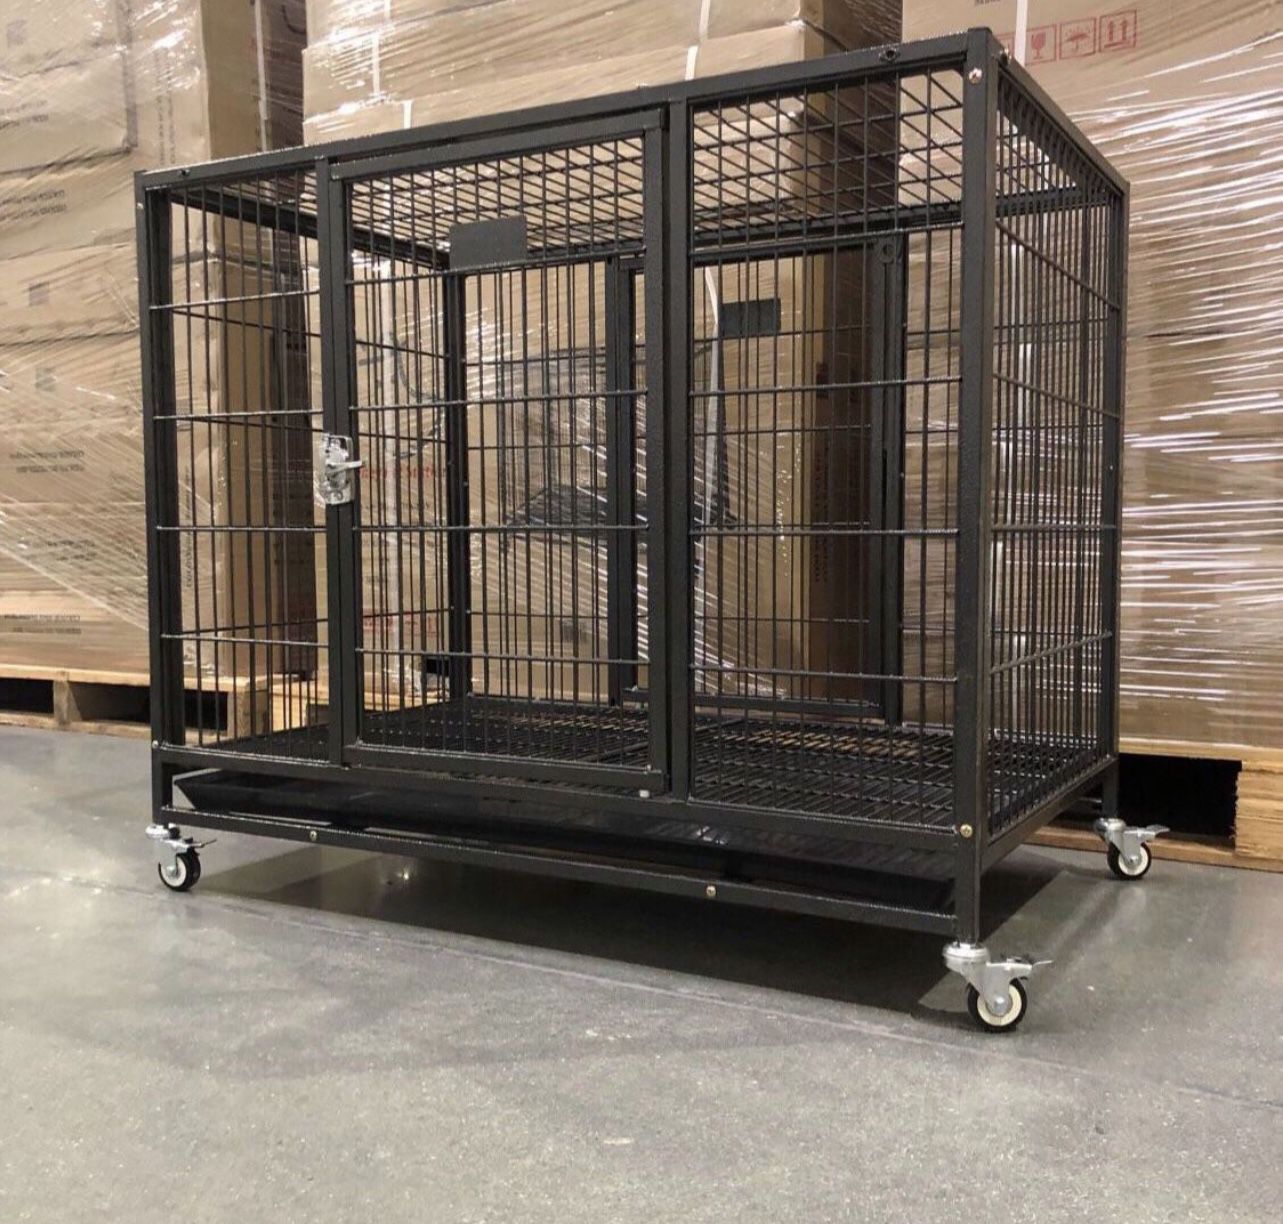 🔱NEW🔱 37” Dog 🐩 Kennel cage Crate🦊🐺🐩 With wheels 🐺🐶🐩🐩